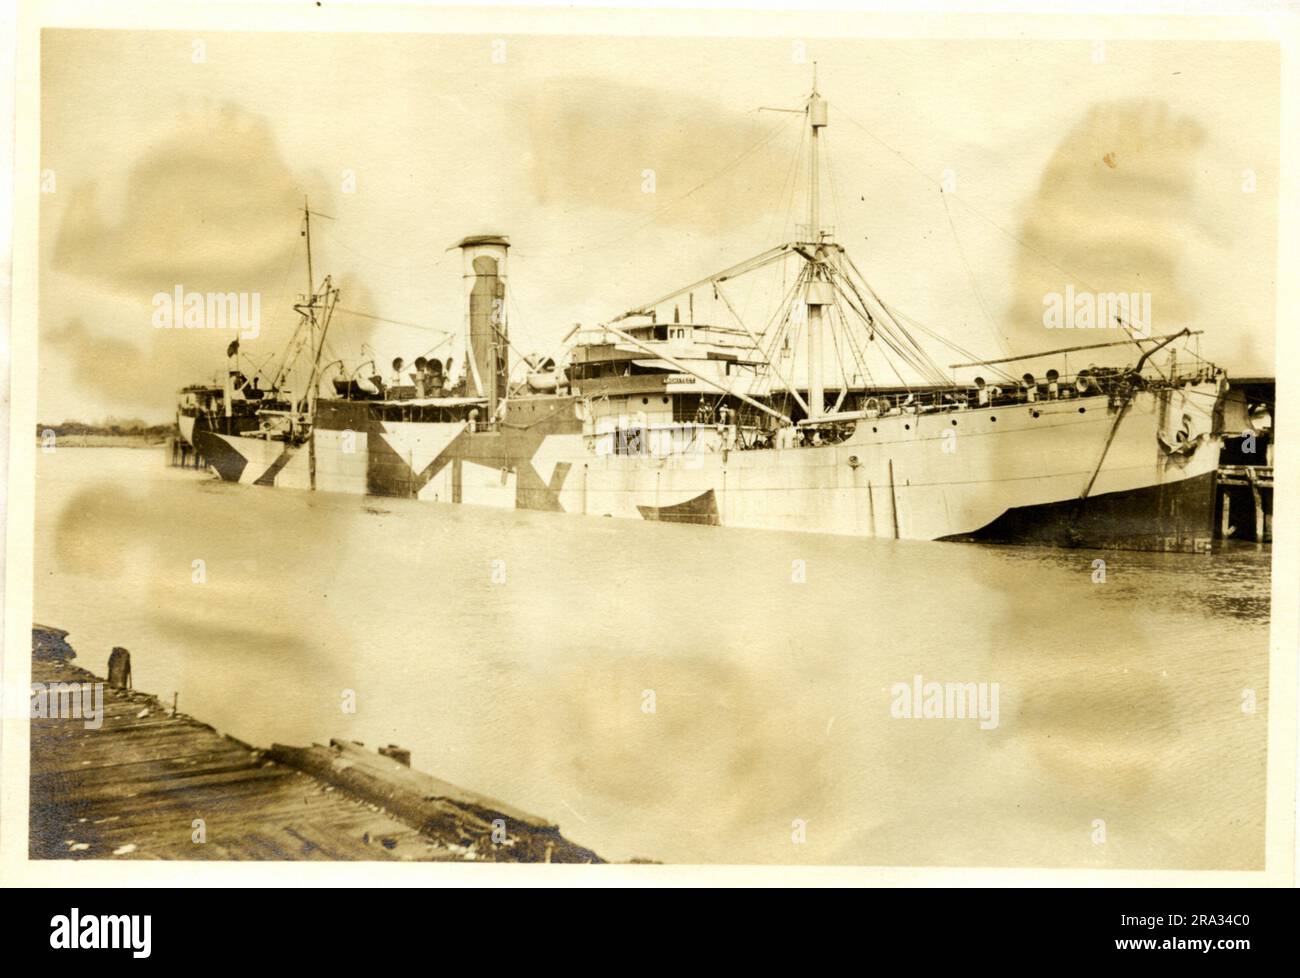 Photograph of the Starboard View of the SS Architect. Starboard View. Date: - July 29, 1918. Photograph Of; - S. S. Architect. Nationality: - British. Tonnage: -6736. Captain: - W. N. Rushforth. Owners: - T. & J. Harrison. Where From: - Plymouth, Eng. Destination: - Liverpool, Eng. Bordeux Bordeaux, France.? Where Photographed: - Savannah, GA. Sixth Naval District. By Whom Photographed: - J. B. Dearborn. Date Photographed: - July 12th., 1918. Where Camouflaged: - West Hartlepool, Eng. Date: - June 7th., 1918. By Whom: - Gray Shipbuilding Co. Type Of Ship: - Well Deck. Beam: 52 ft., Length: -41 Stock Photo